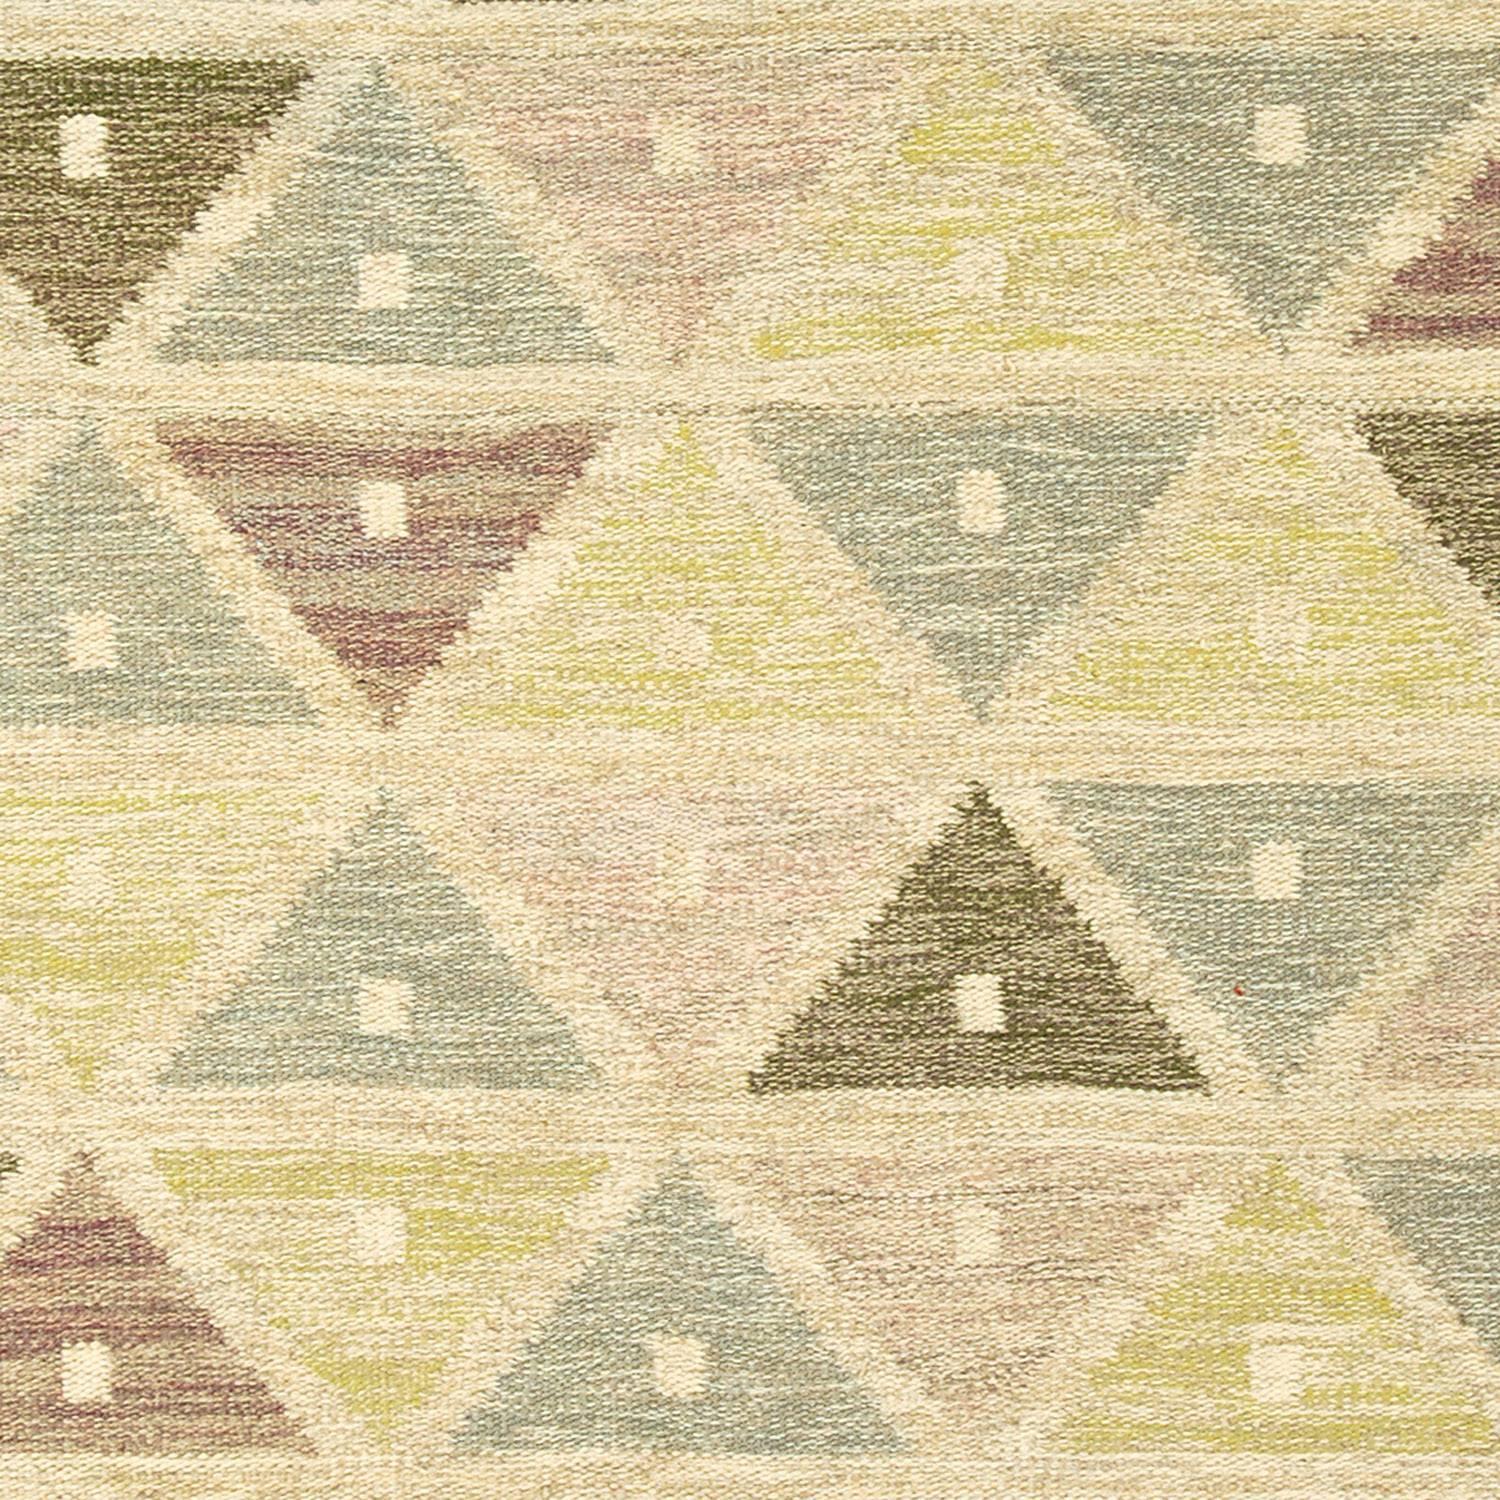 Hand-Woven Mid-20th Century Swedish Flat-Weave Carpet by Sigvard Bernadotte For Sale